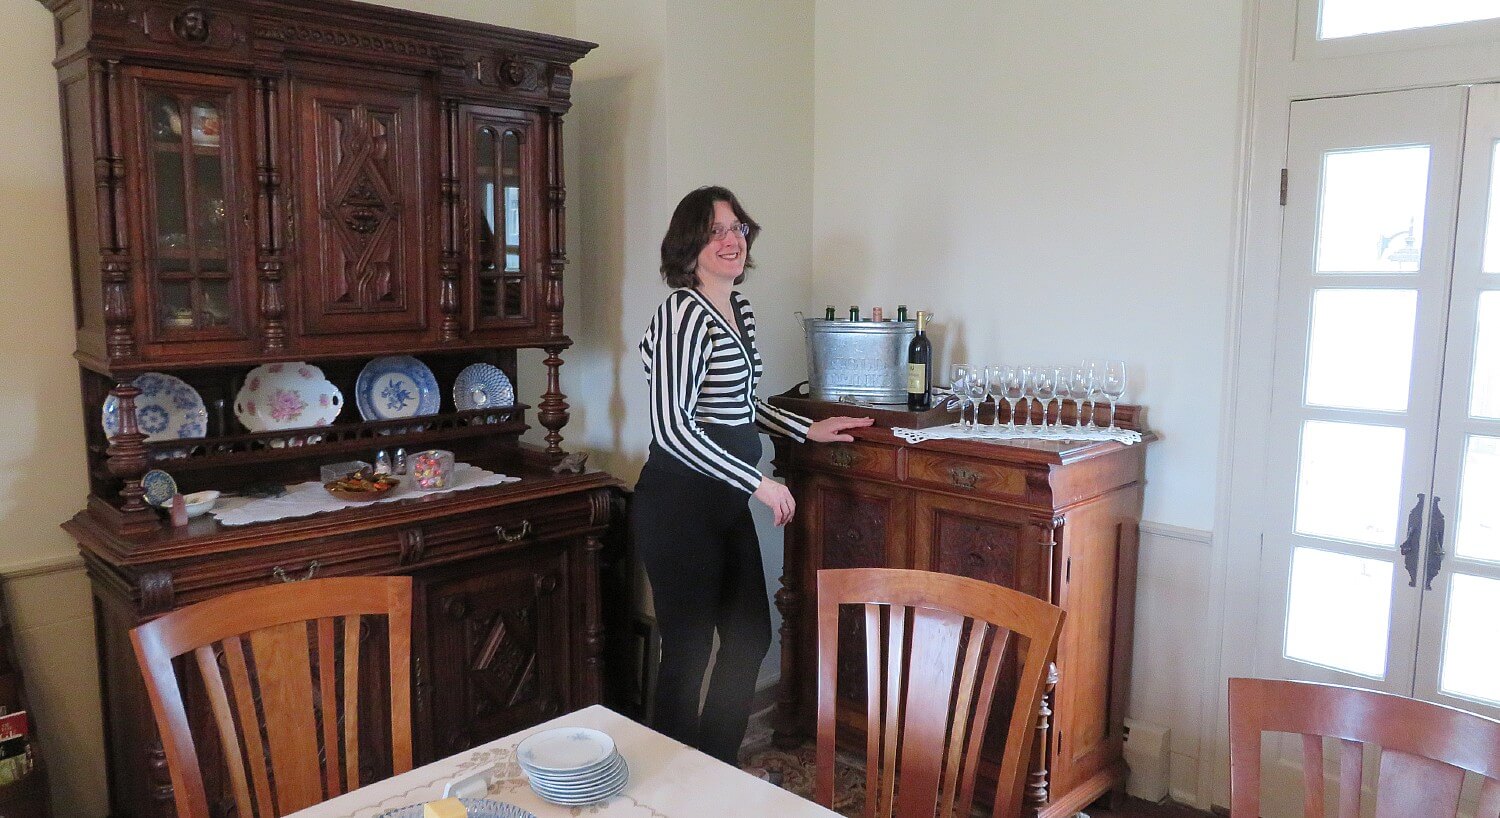 Woman in black pants and striped shirt standing next to a tall buffet table in a dining room